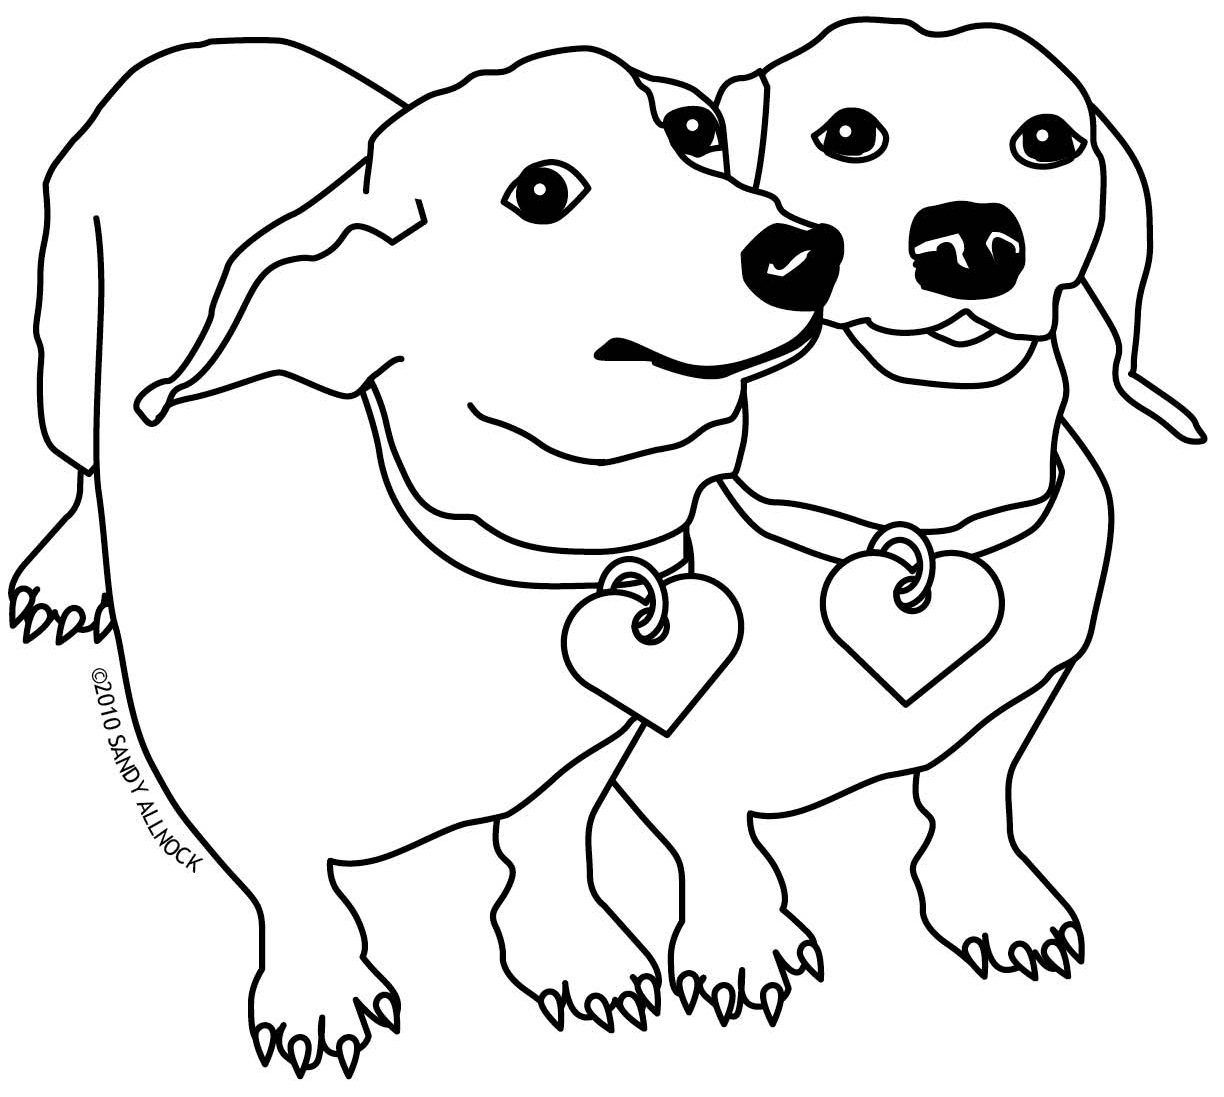 Clifford The Big Red Dog Coloring Pages At Getcolorings.com | Free